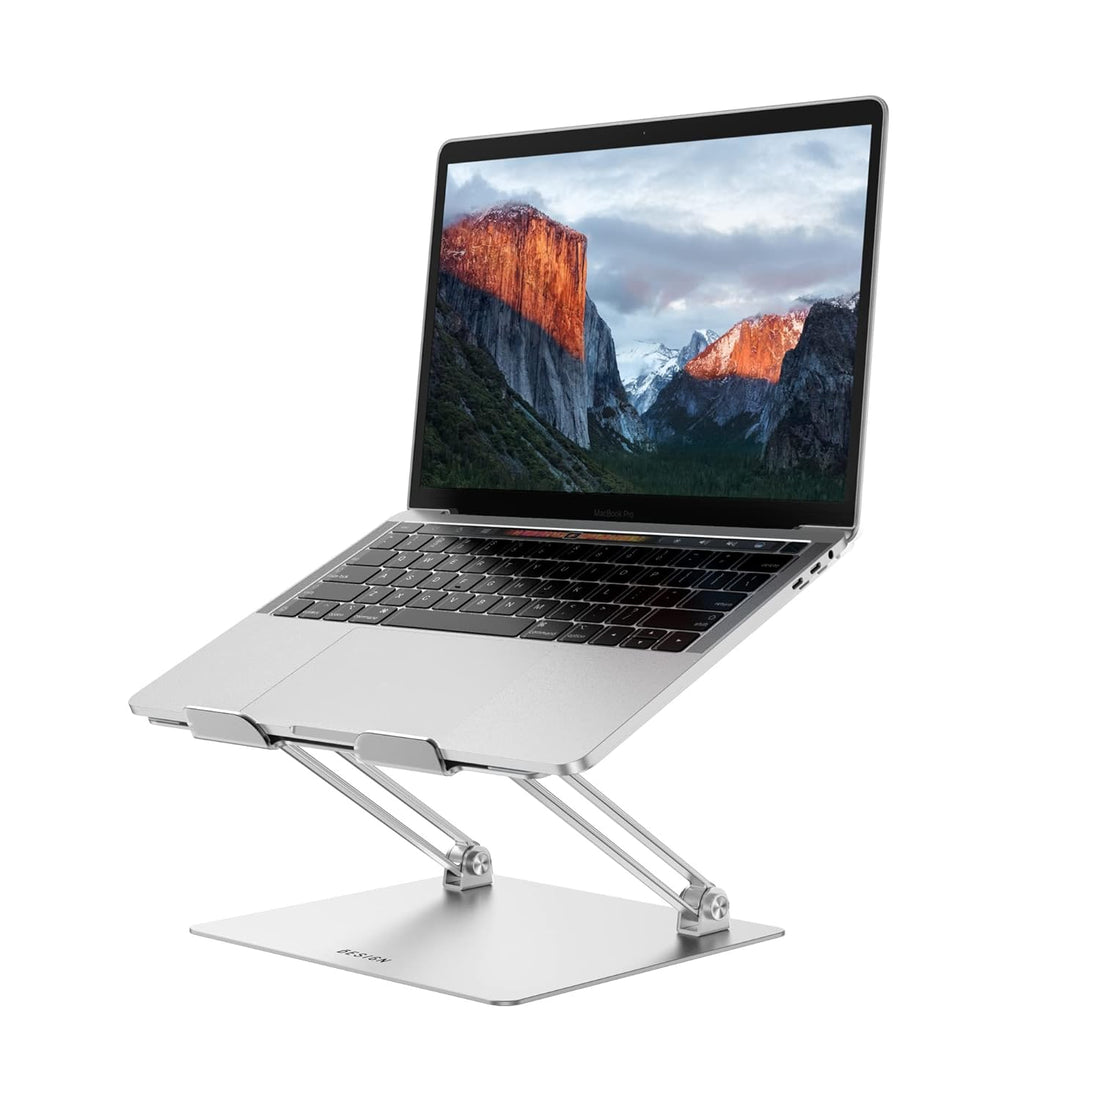 Besign LS10 Aluminum Laptop Stand, Ergonomic Adjustable Notebook Stand, Riser Holder Computer Stand Compatible with Air, Pro, Dell, HP, Lenovo More 10-15.6" Laptops, Silver